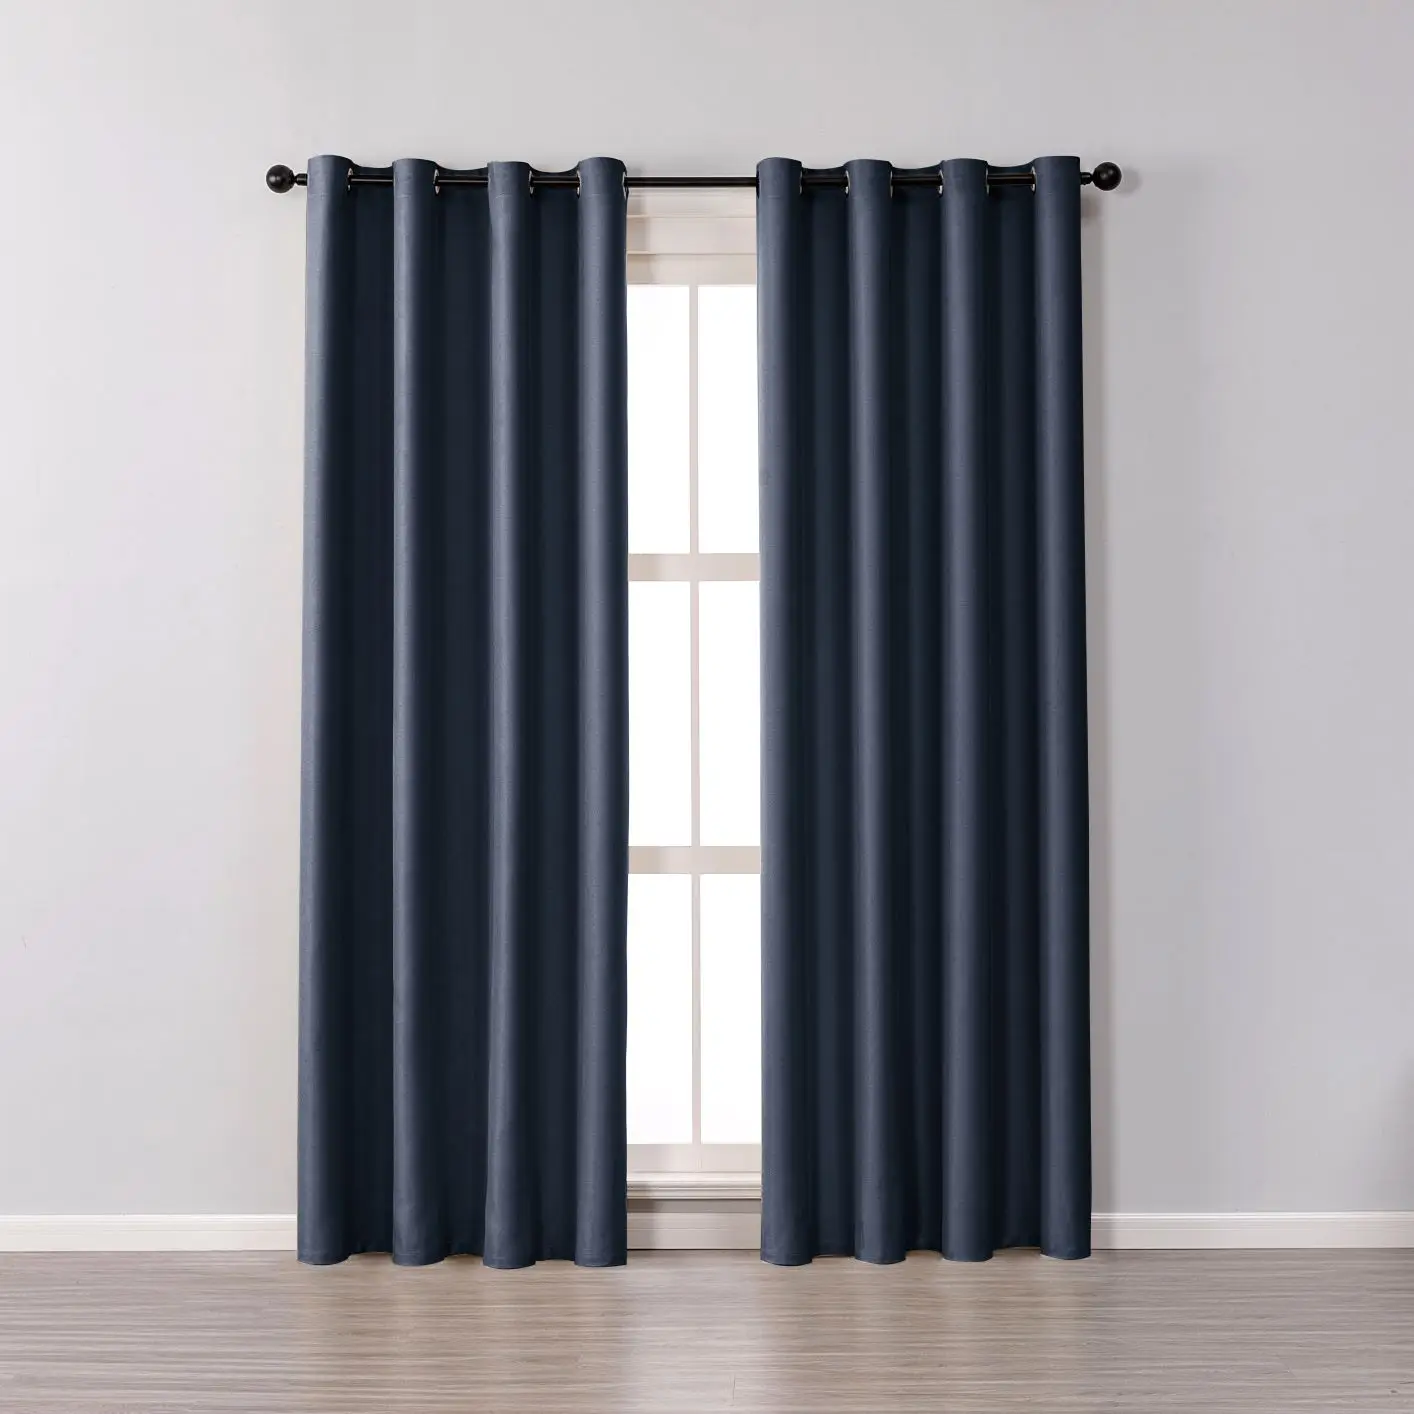 

XUNTUO Modern Blackout Curtain for Living Room Bedroom Finished Window Treatment Finished Solid Color Curtains Blind Drape Decor